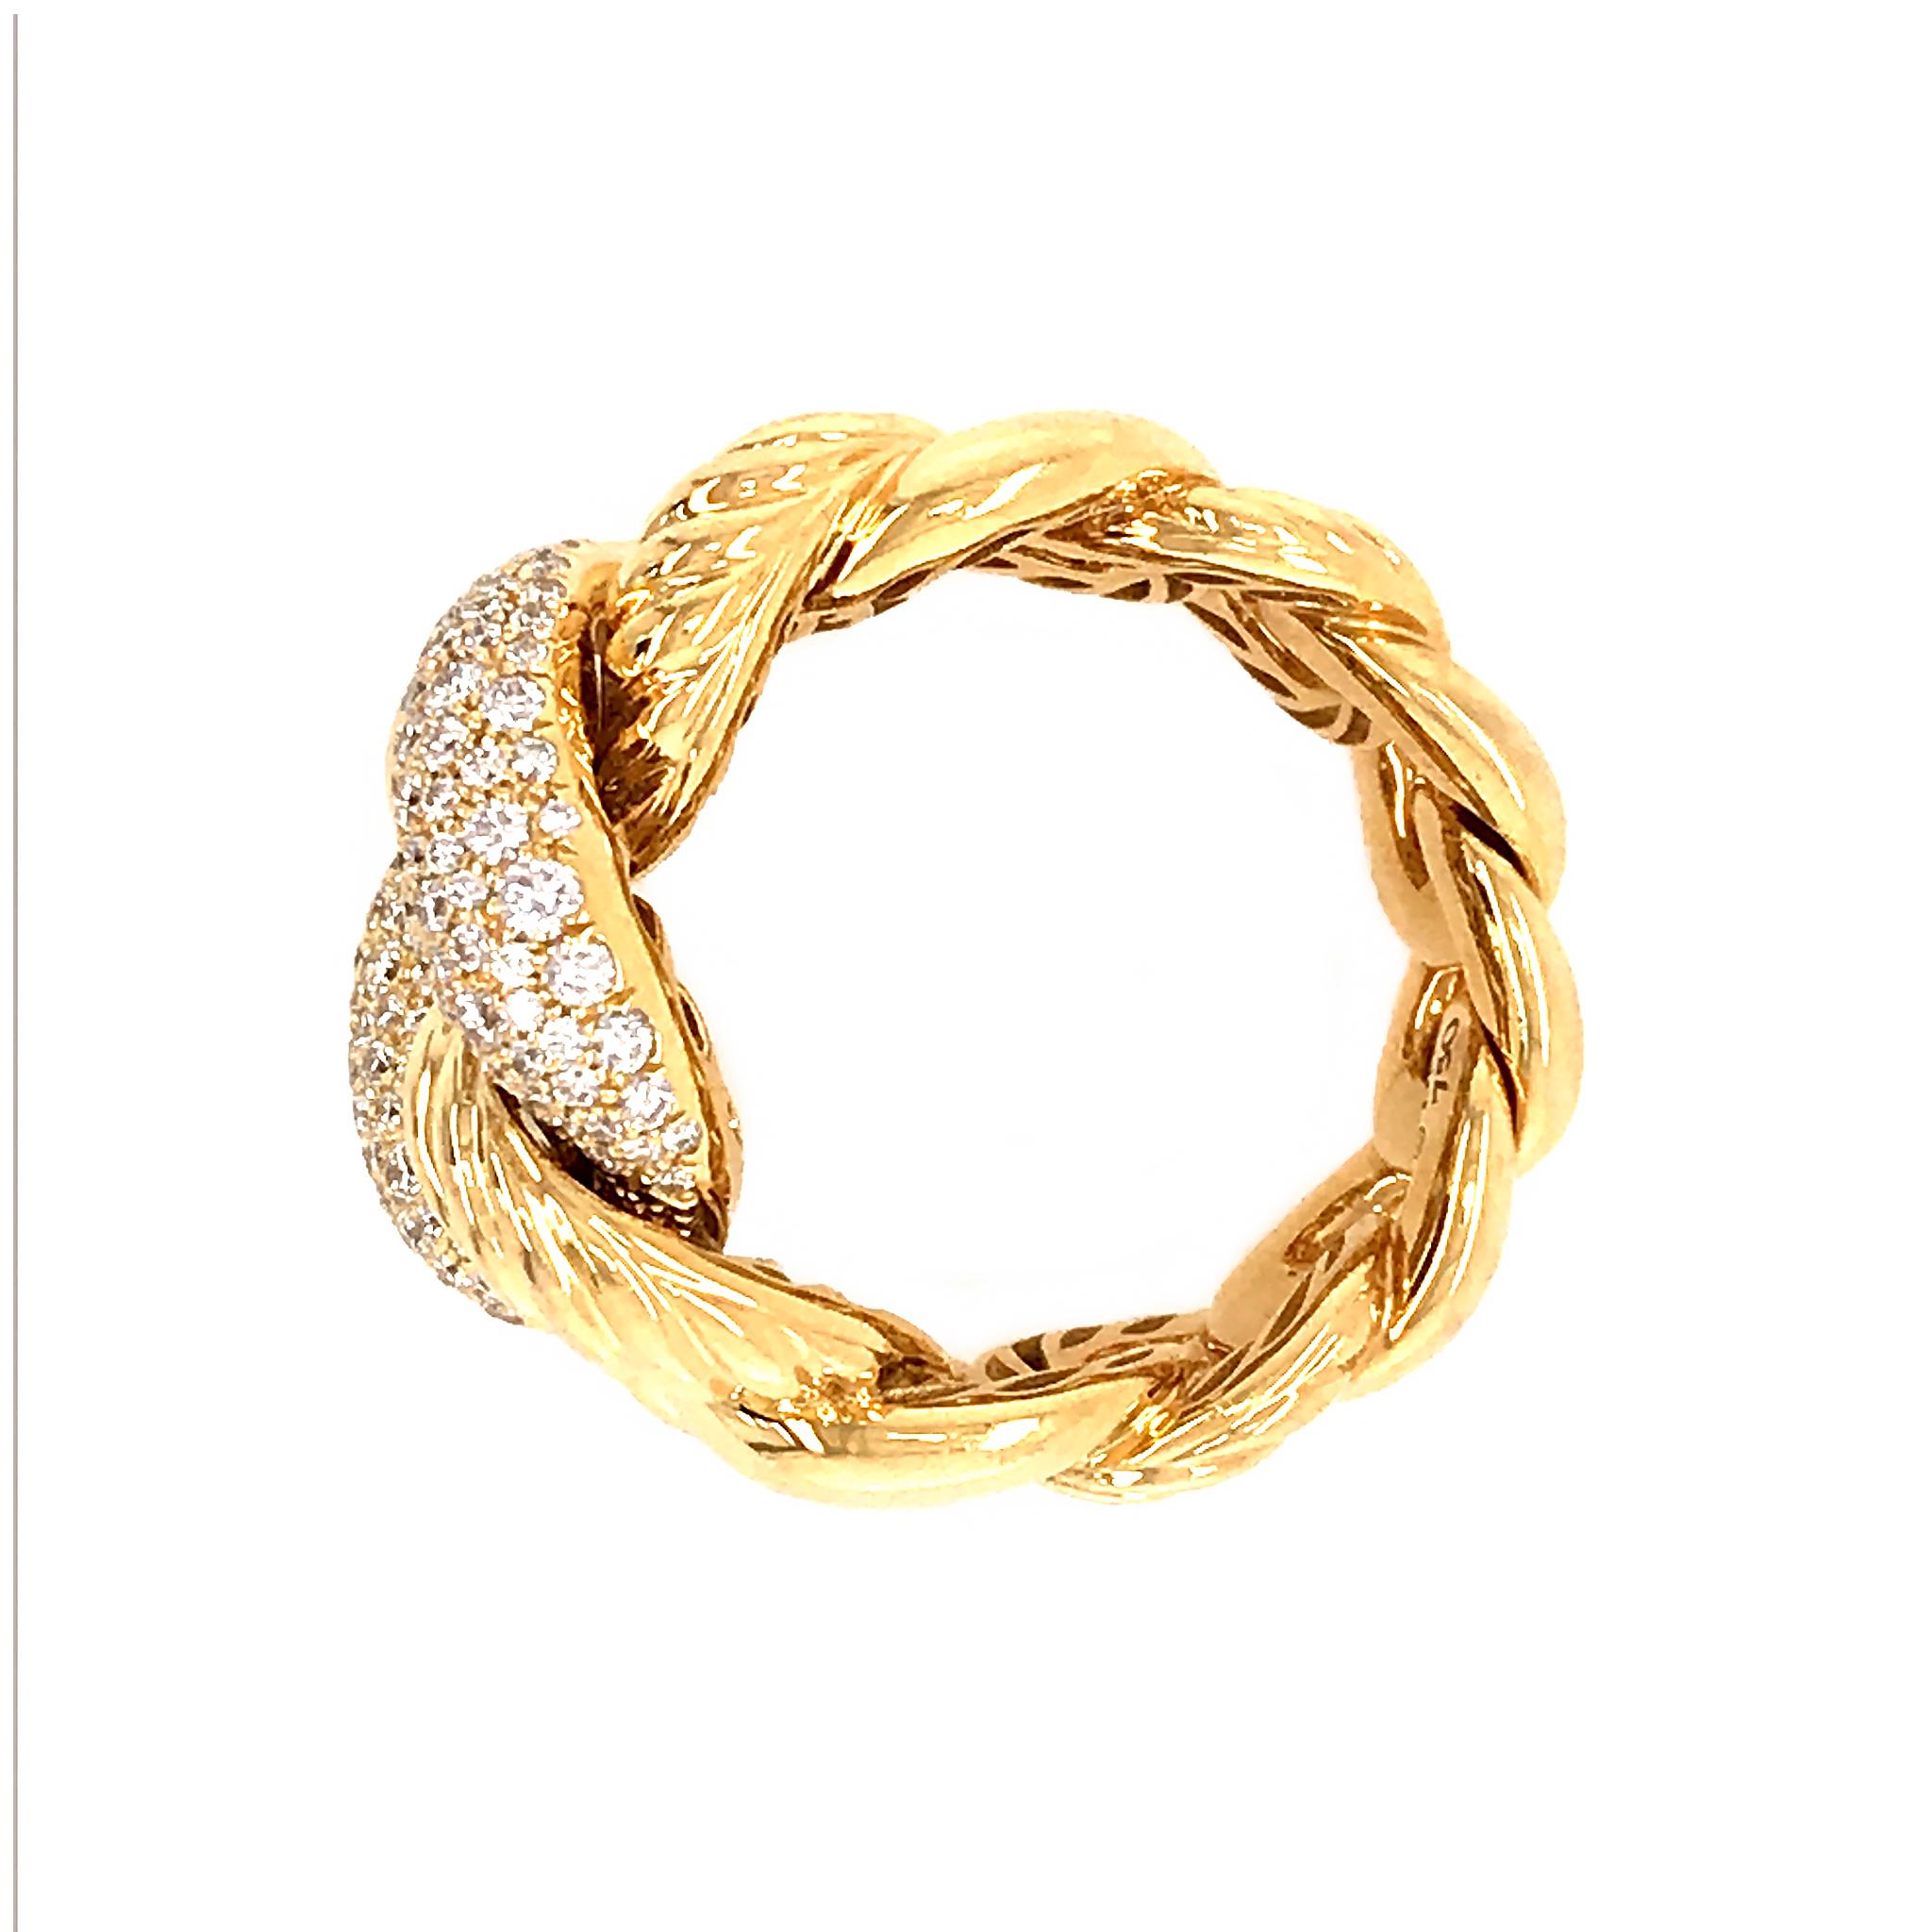 METAL TYPE: 18K Yellow Gold
RING SIZE: 7
STONE WEIGHT: 1.25 ct twd